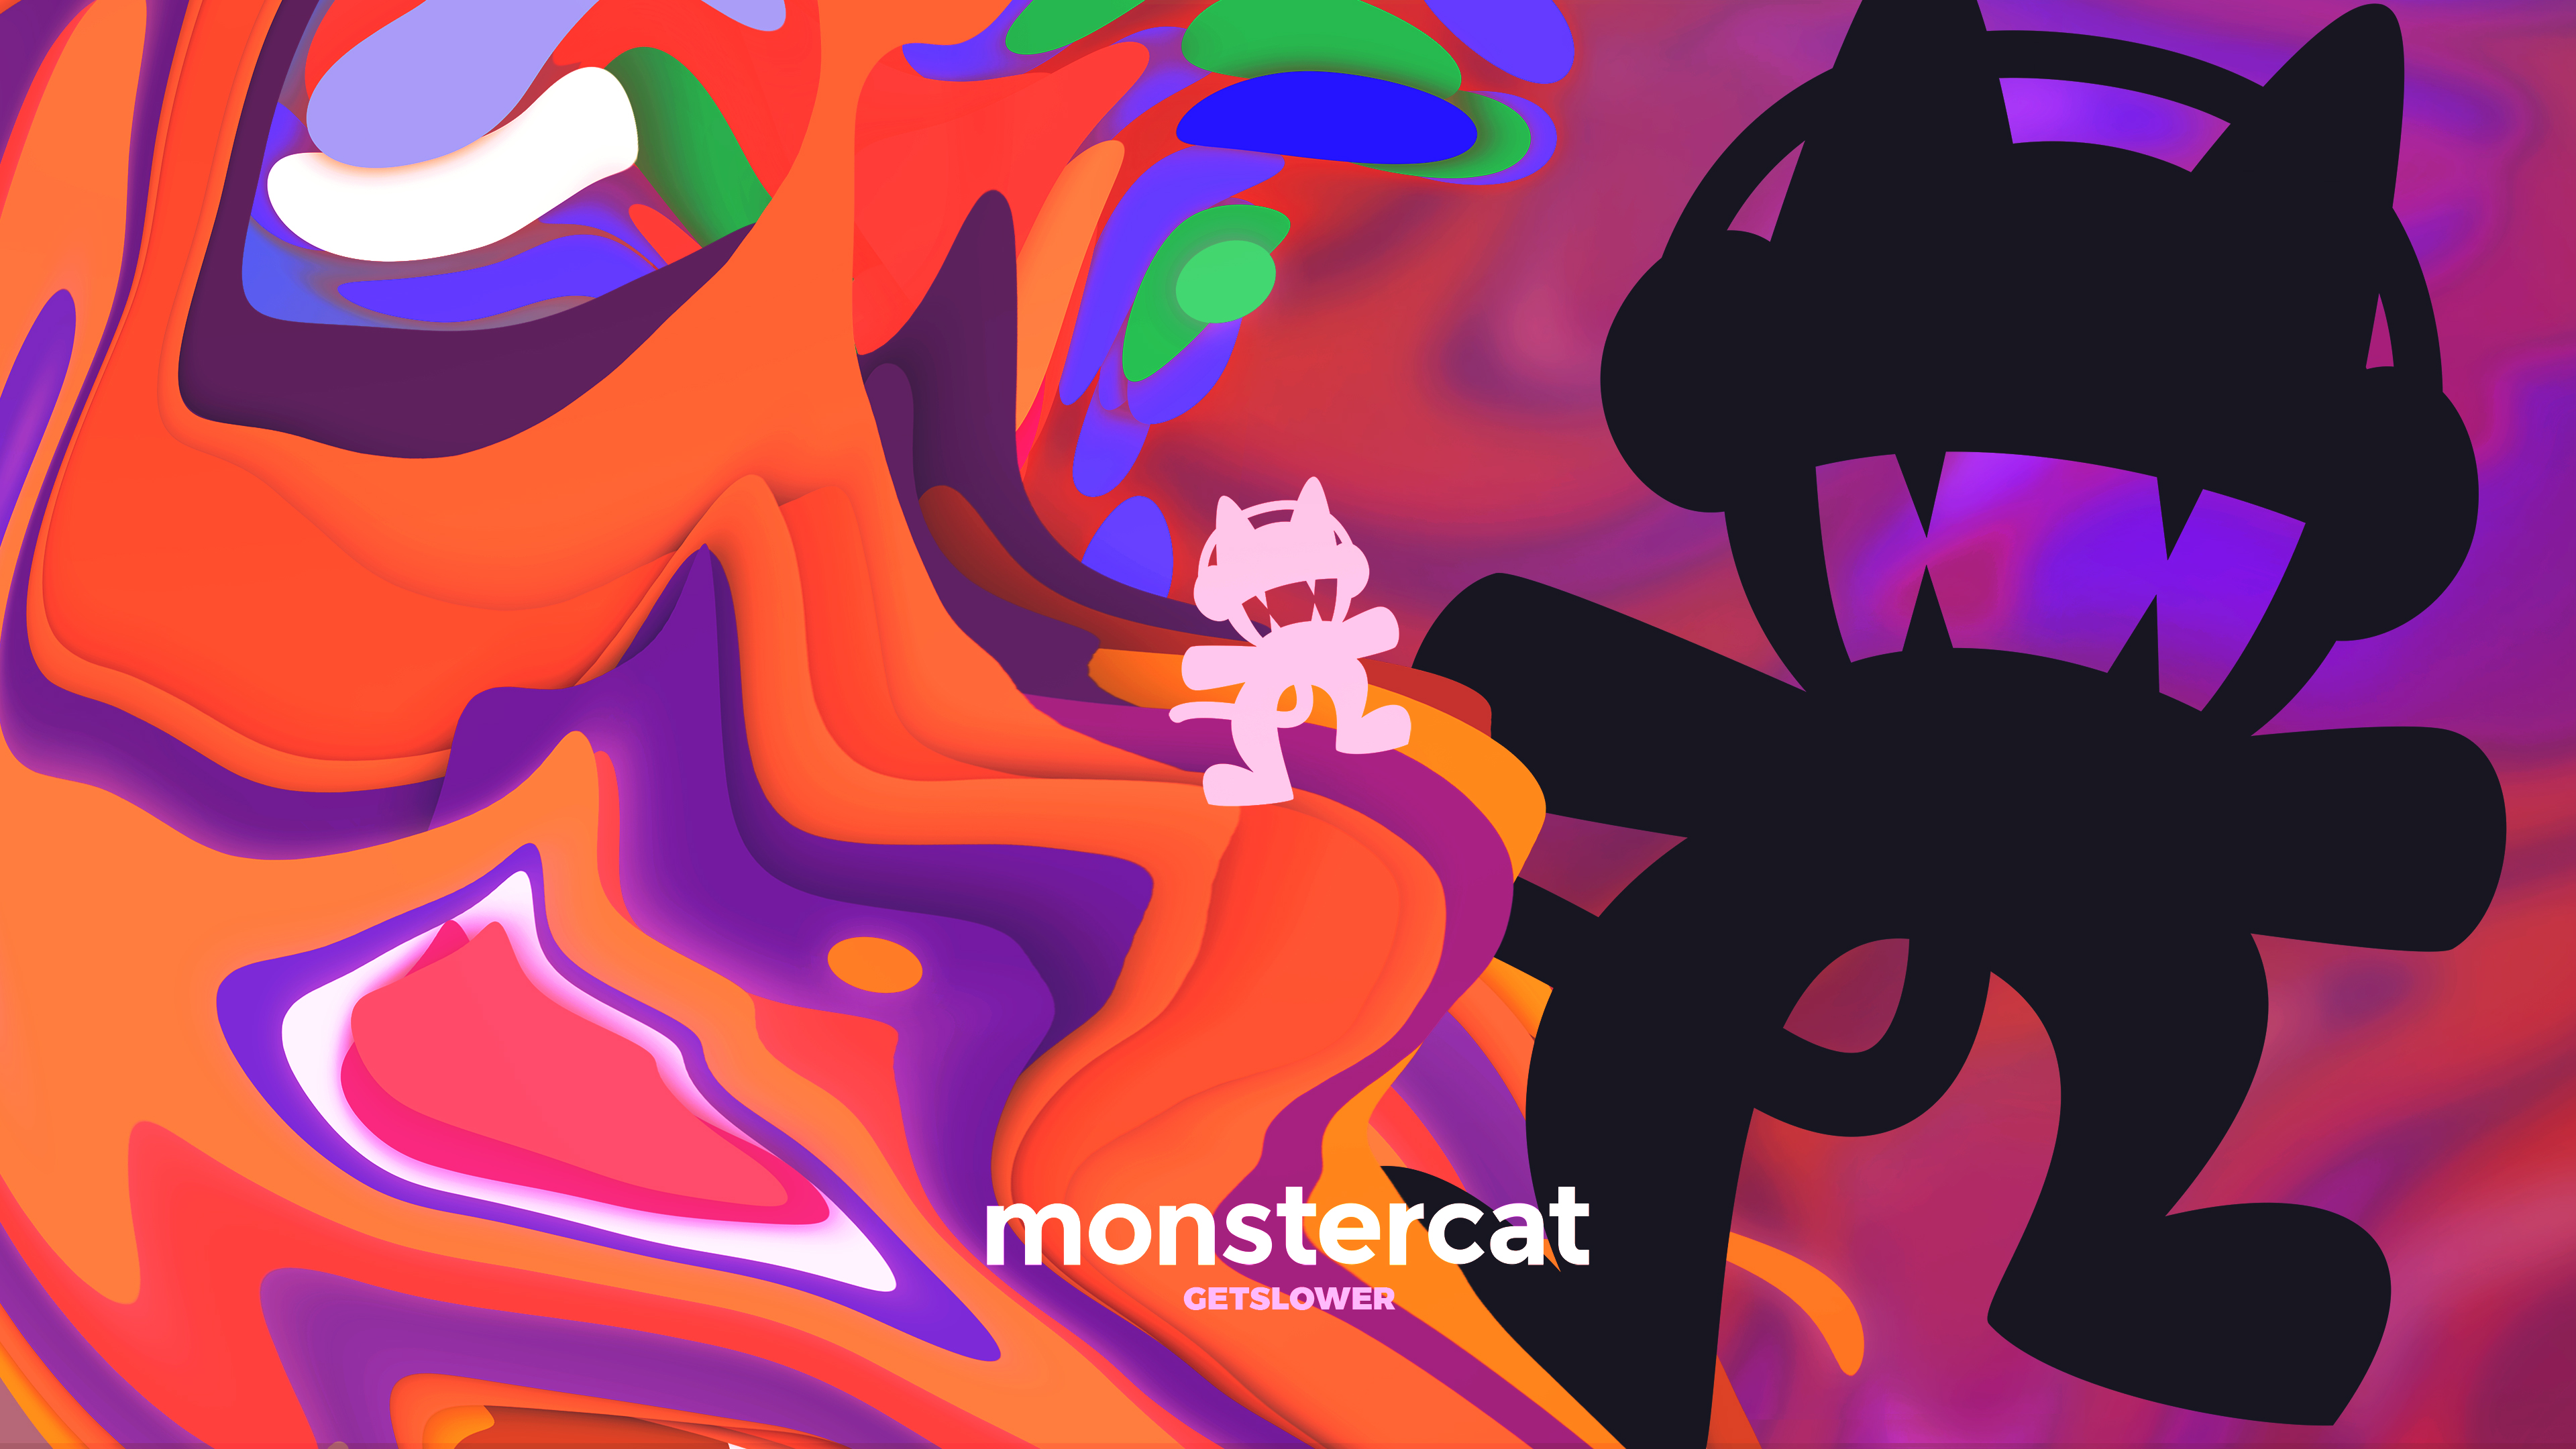 General 3840x2160 Monstercat music colorful shapes abstract Record label